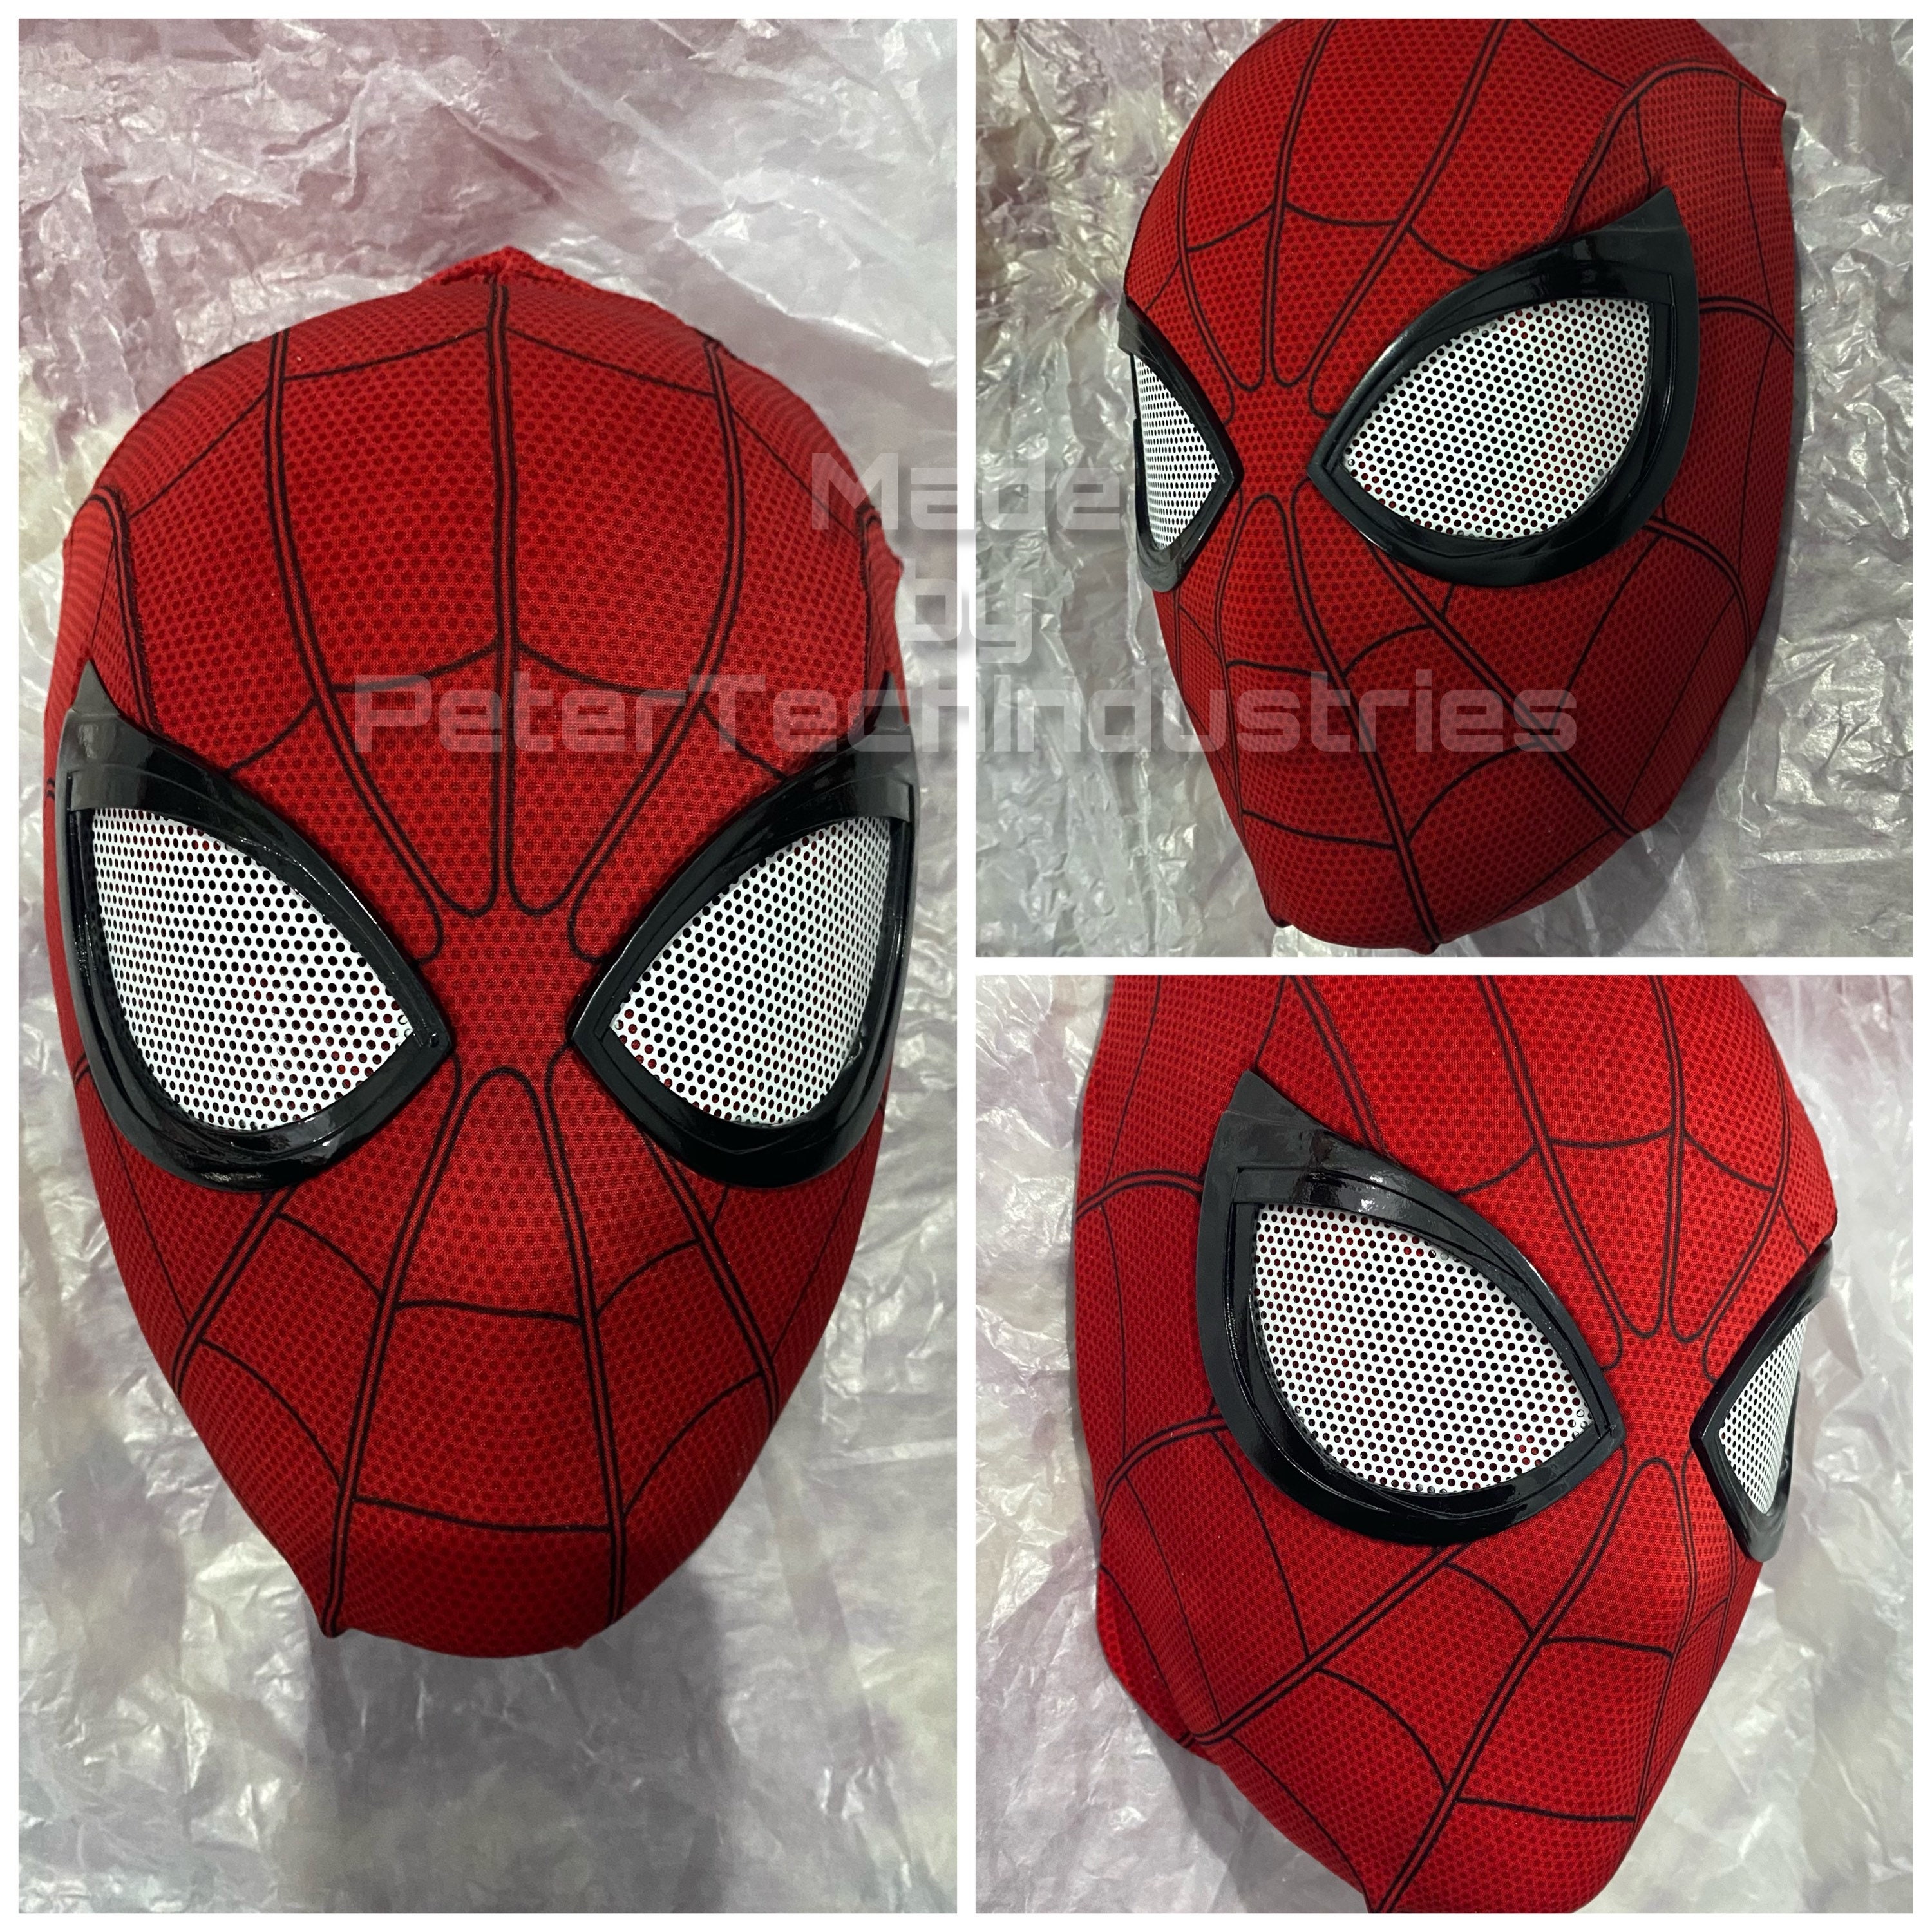 Spider Man Far From Home Mask Spider-man into the spider verse Mask face shell 